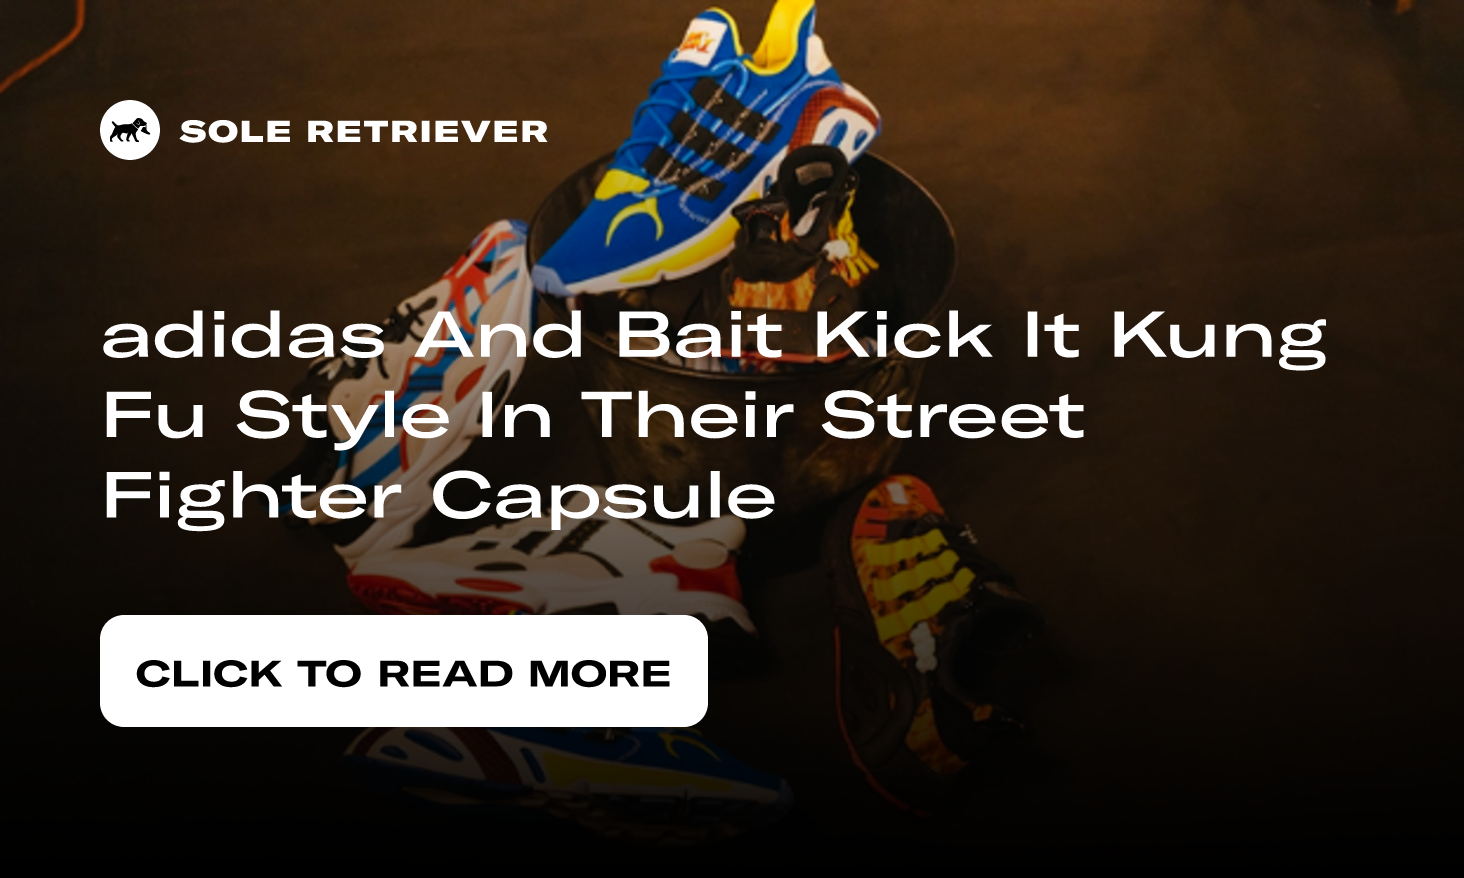 adidas And Bait Kick It Kung Fu Style In Their Street Fighter Capsule